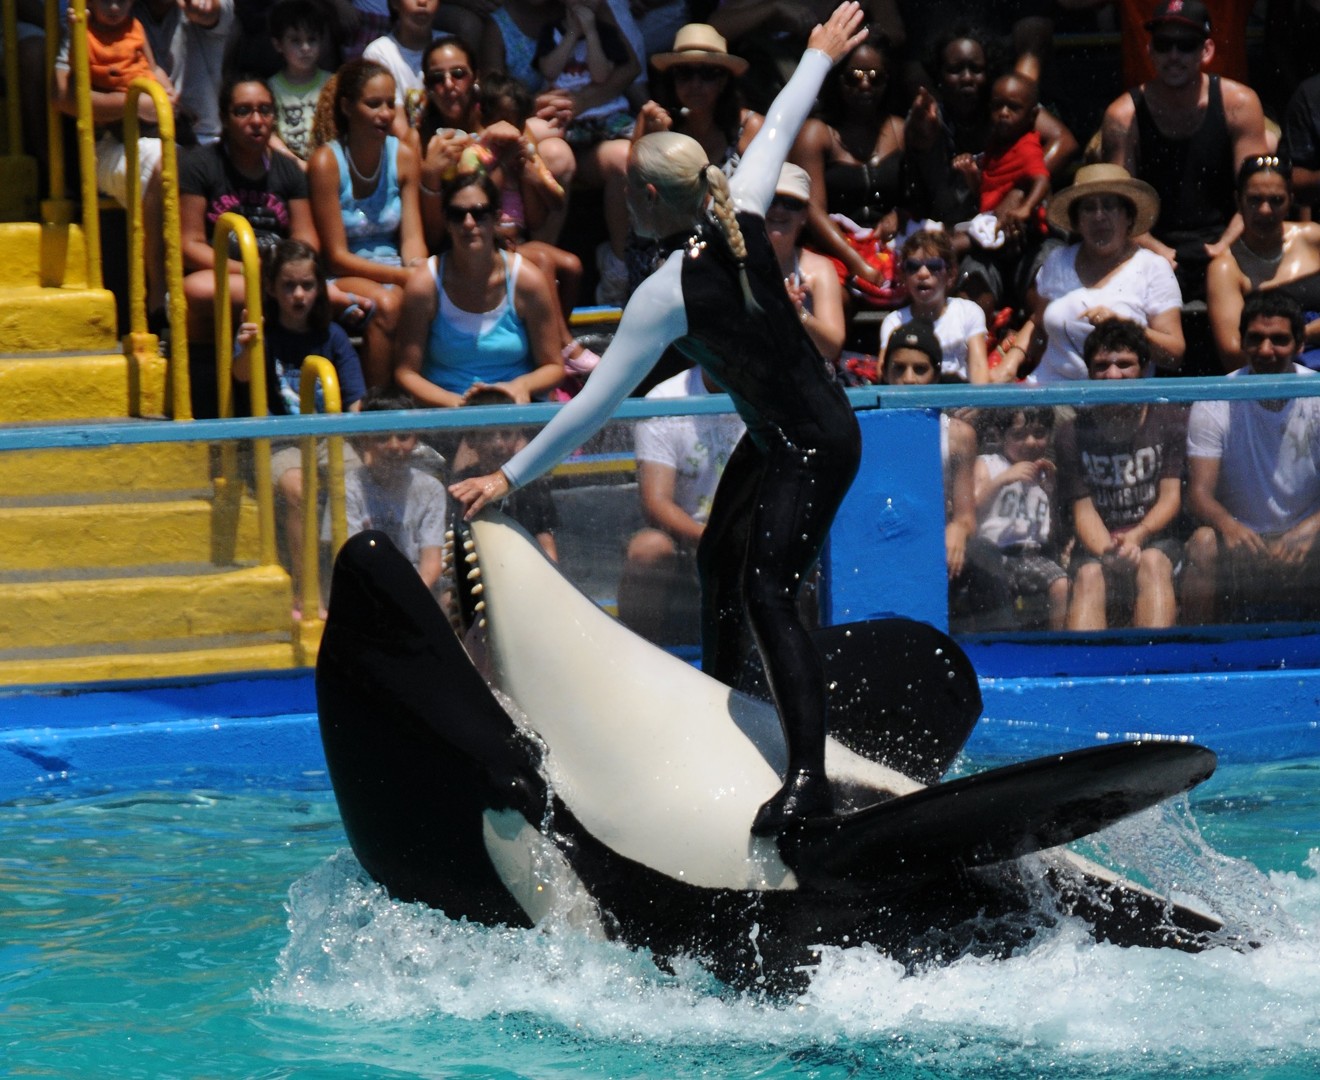 Lolita the killer whale had been living in captivity ever since she was captured from Puget Sound in 1970.